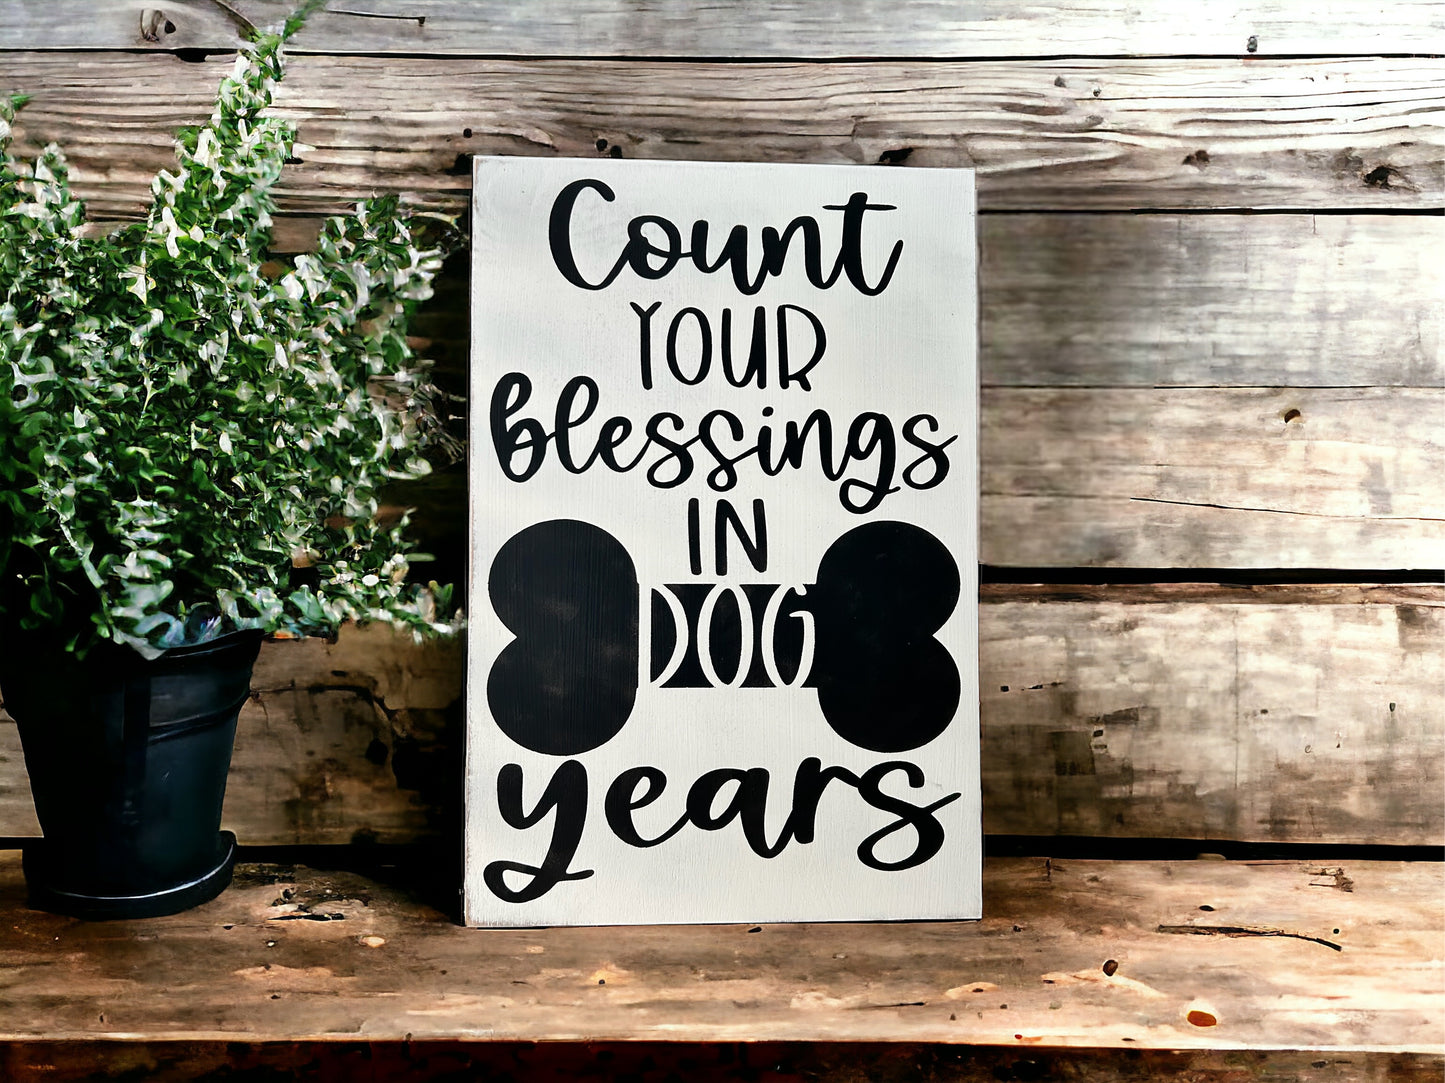 Count Your Blessings in Dog Years - Rustic Wood Sign